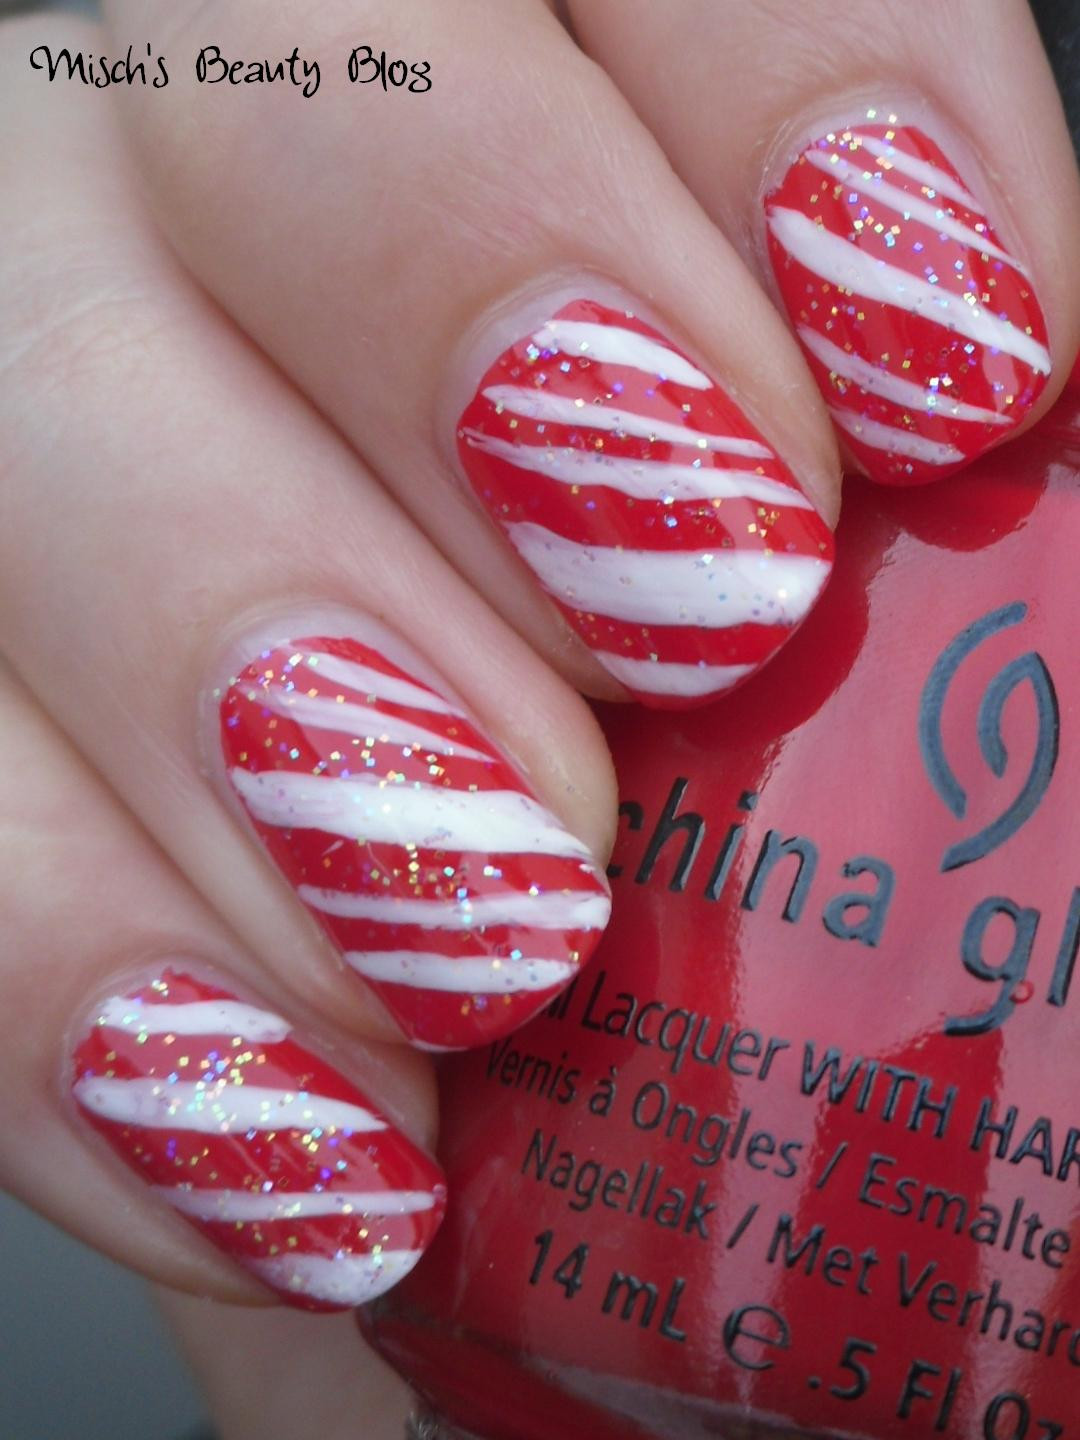 Christmas Nails Candy Cane
 Misch s Beauty Blog NOTD December 15th Candy Cane Nail Art